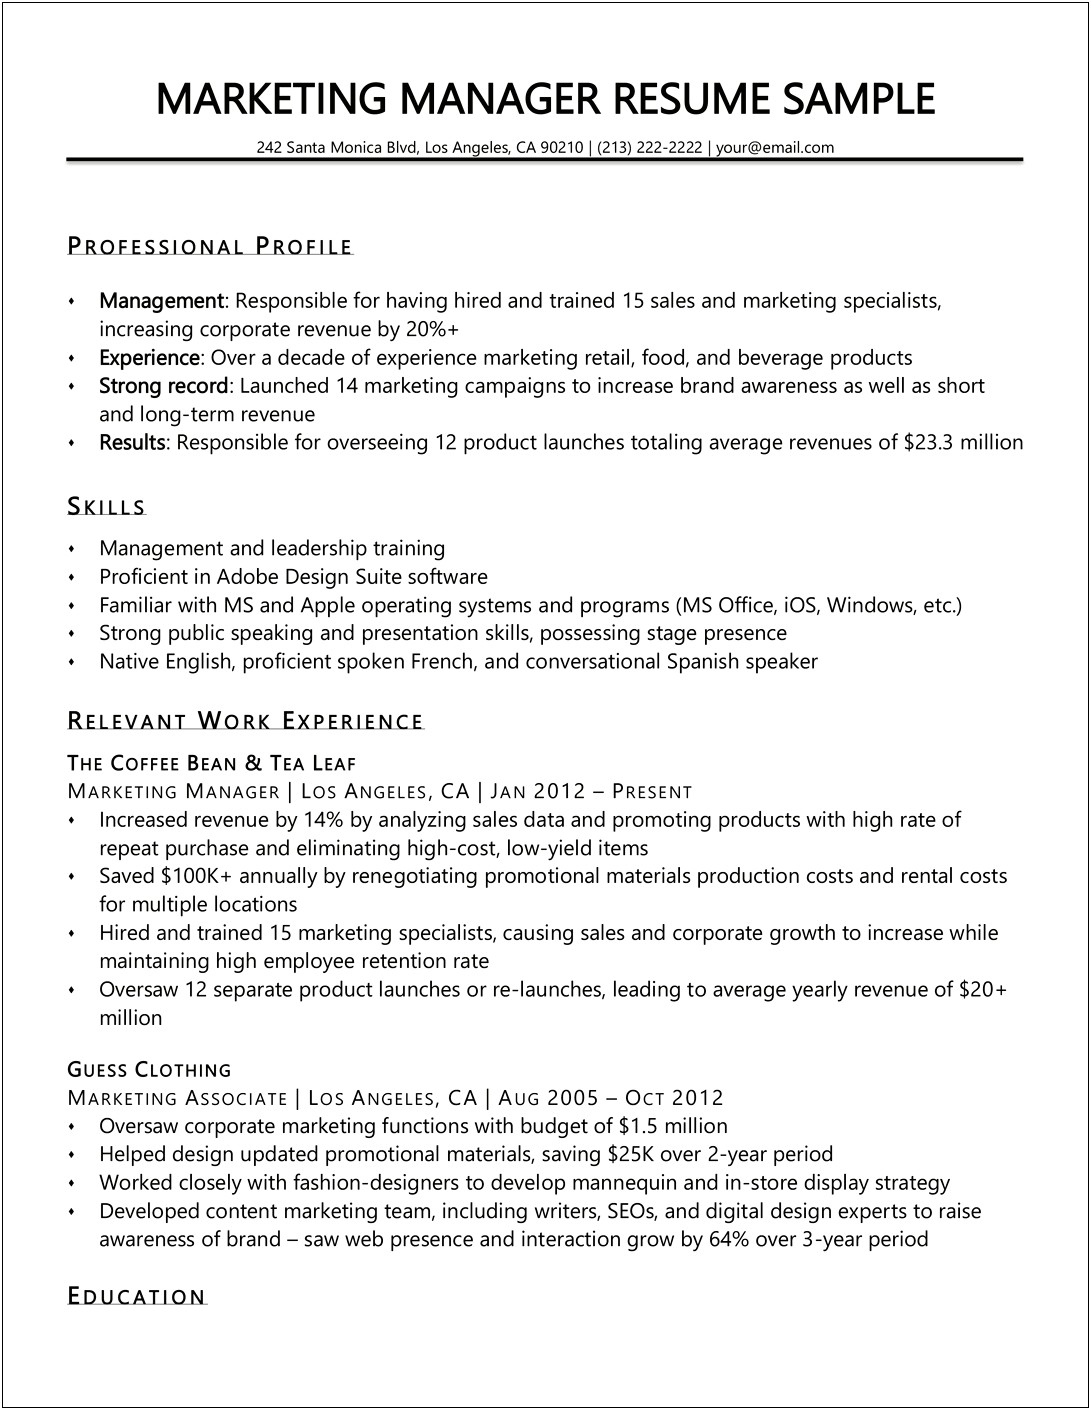 Resume Objective For Fashion Retail